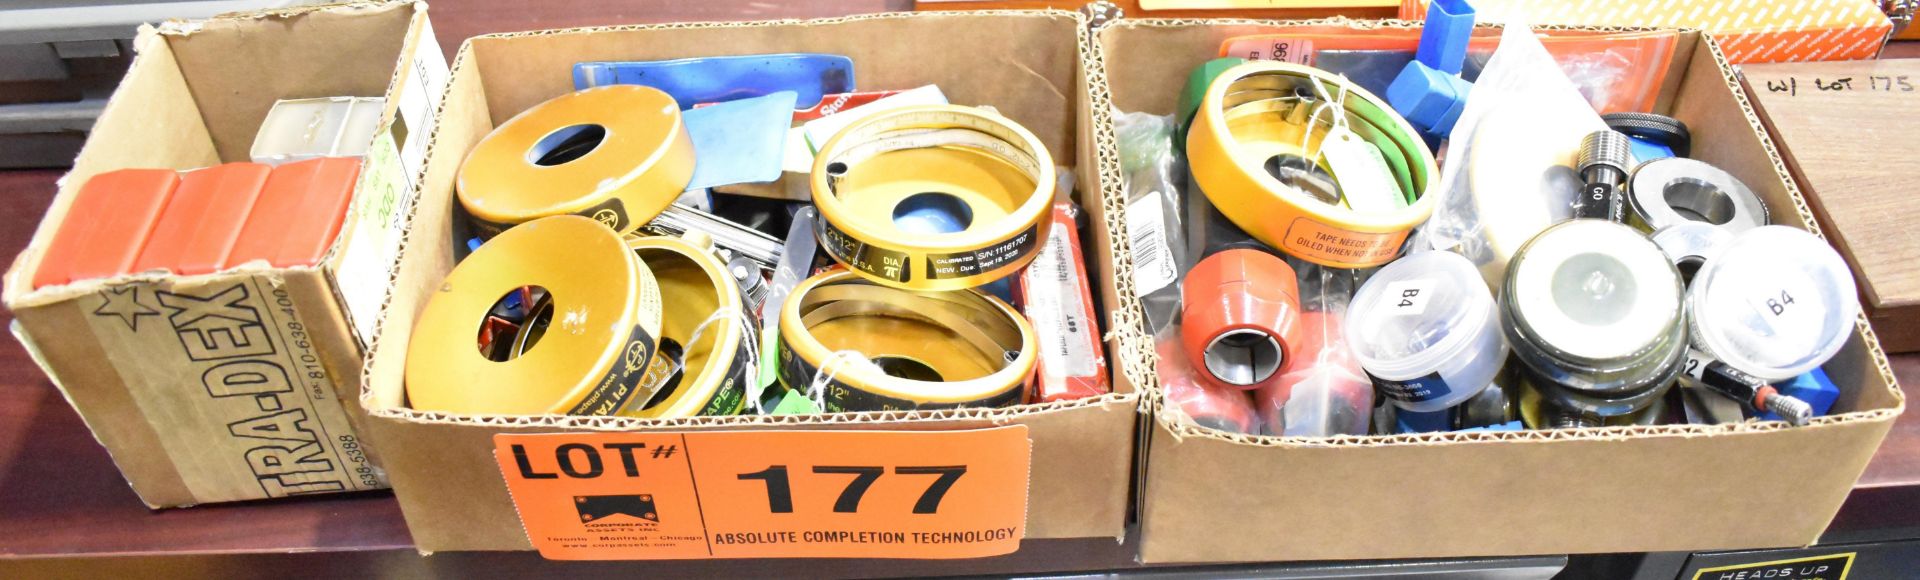 LOT/ RING GAUGES & PI TAPE GAUGES [RIGGING FEES FOR LOT #177 - $10 USD PLUS APPLICABLE TAXES]